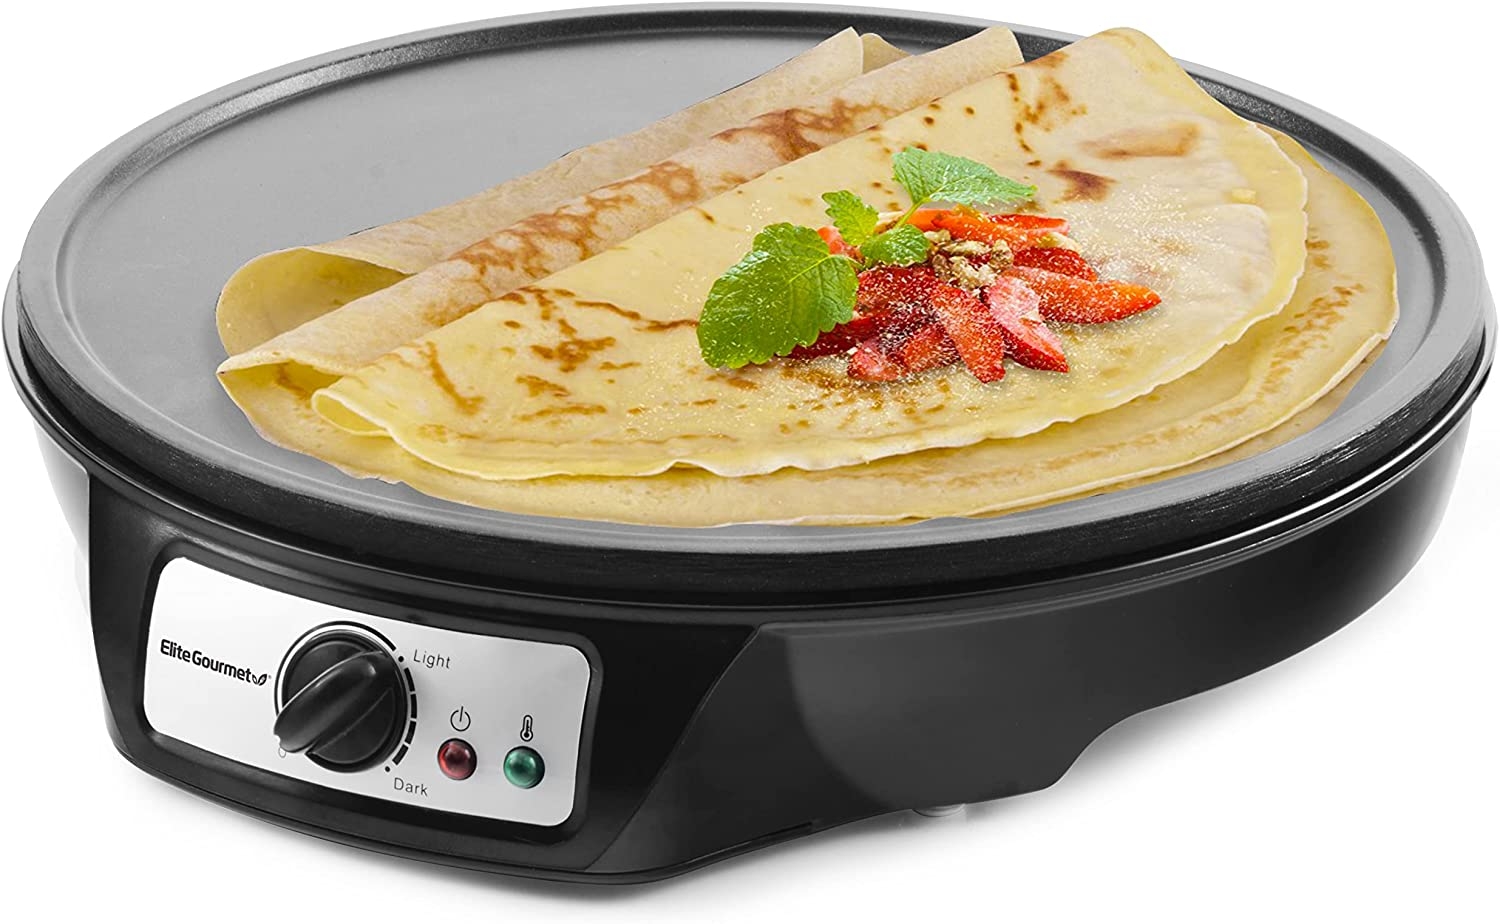 Elite Gourmet EGR2722A Electric 10.5″ x 8.5″ Griddle, Cool-touch Handles Non-Stick Surface, Removable/Adjustable Thermostat,